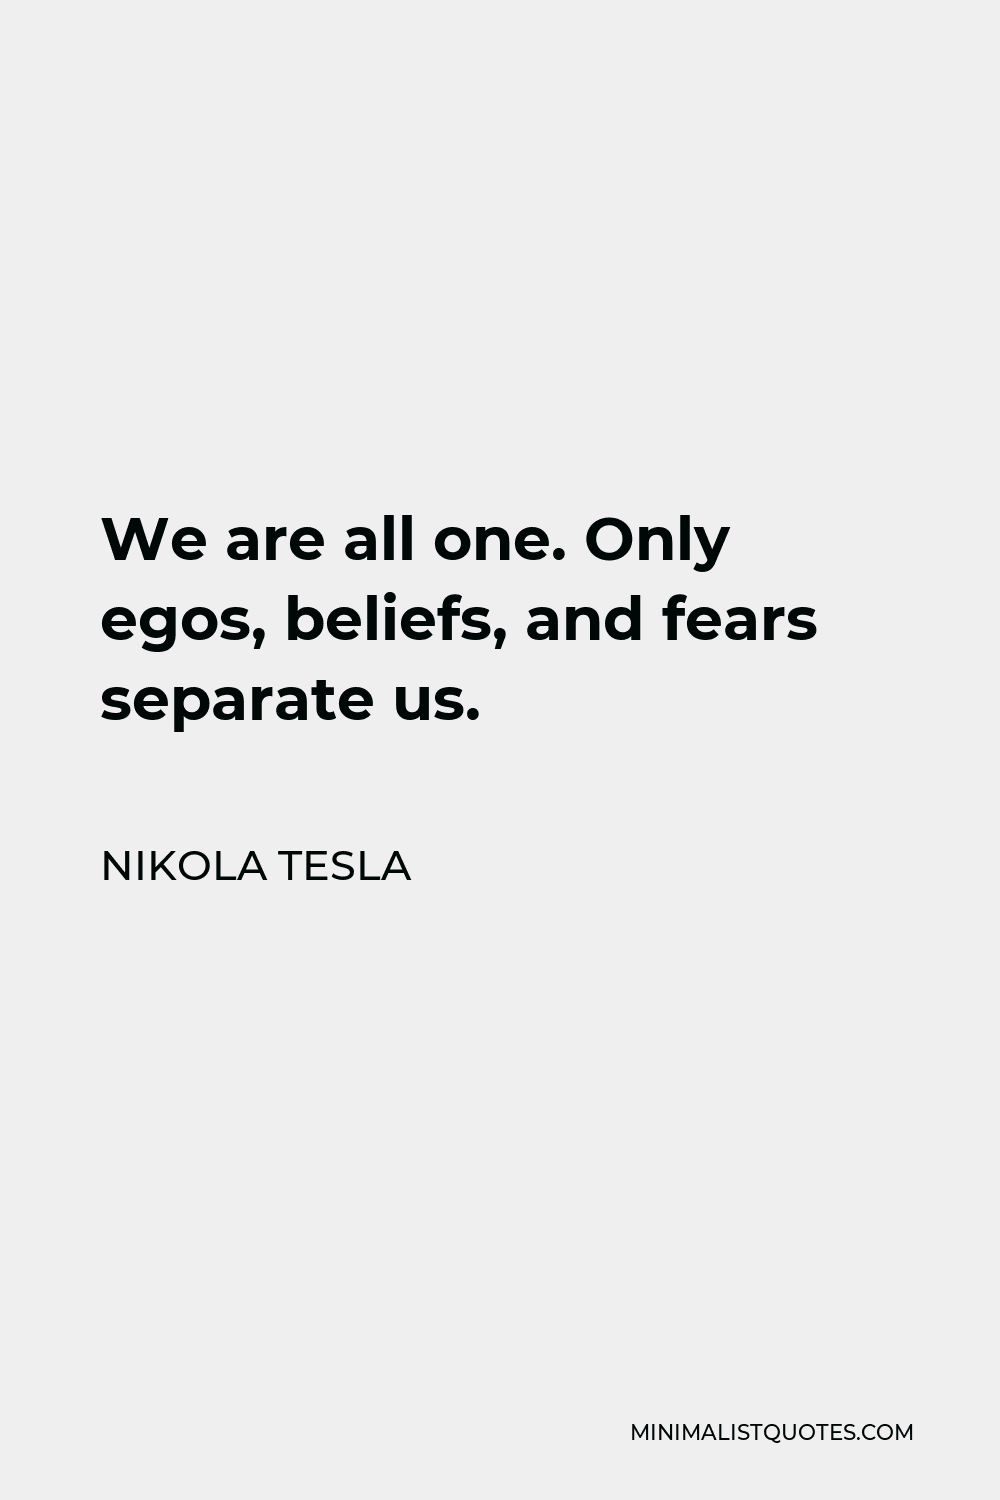 Nikola Tesla Quote - We are all one. Only egos, beliefs, and fears separate us.